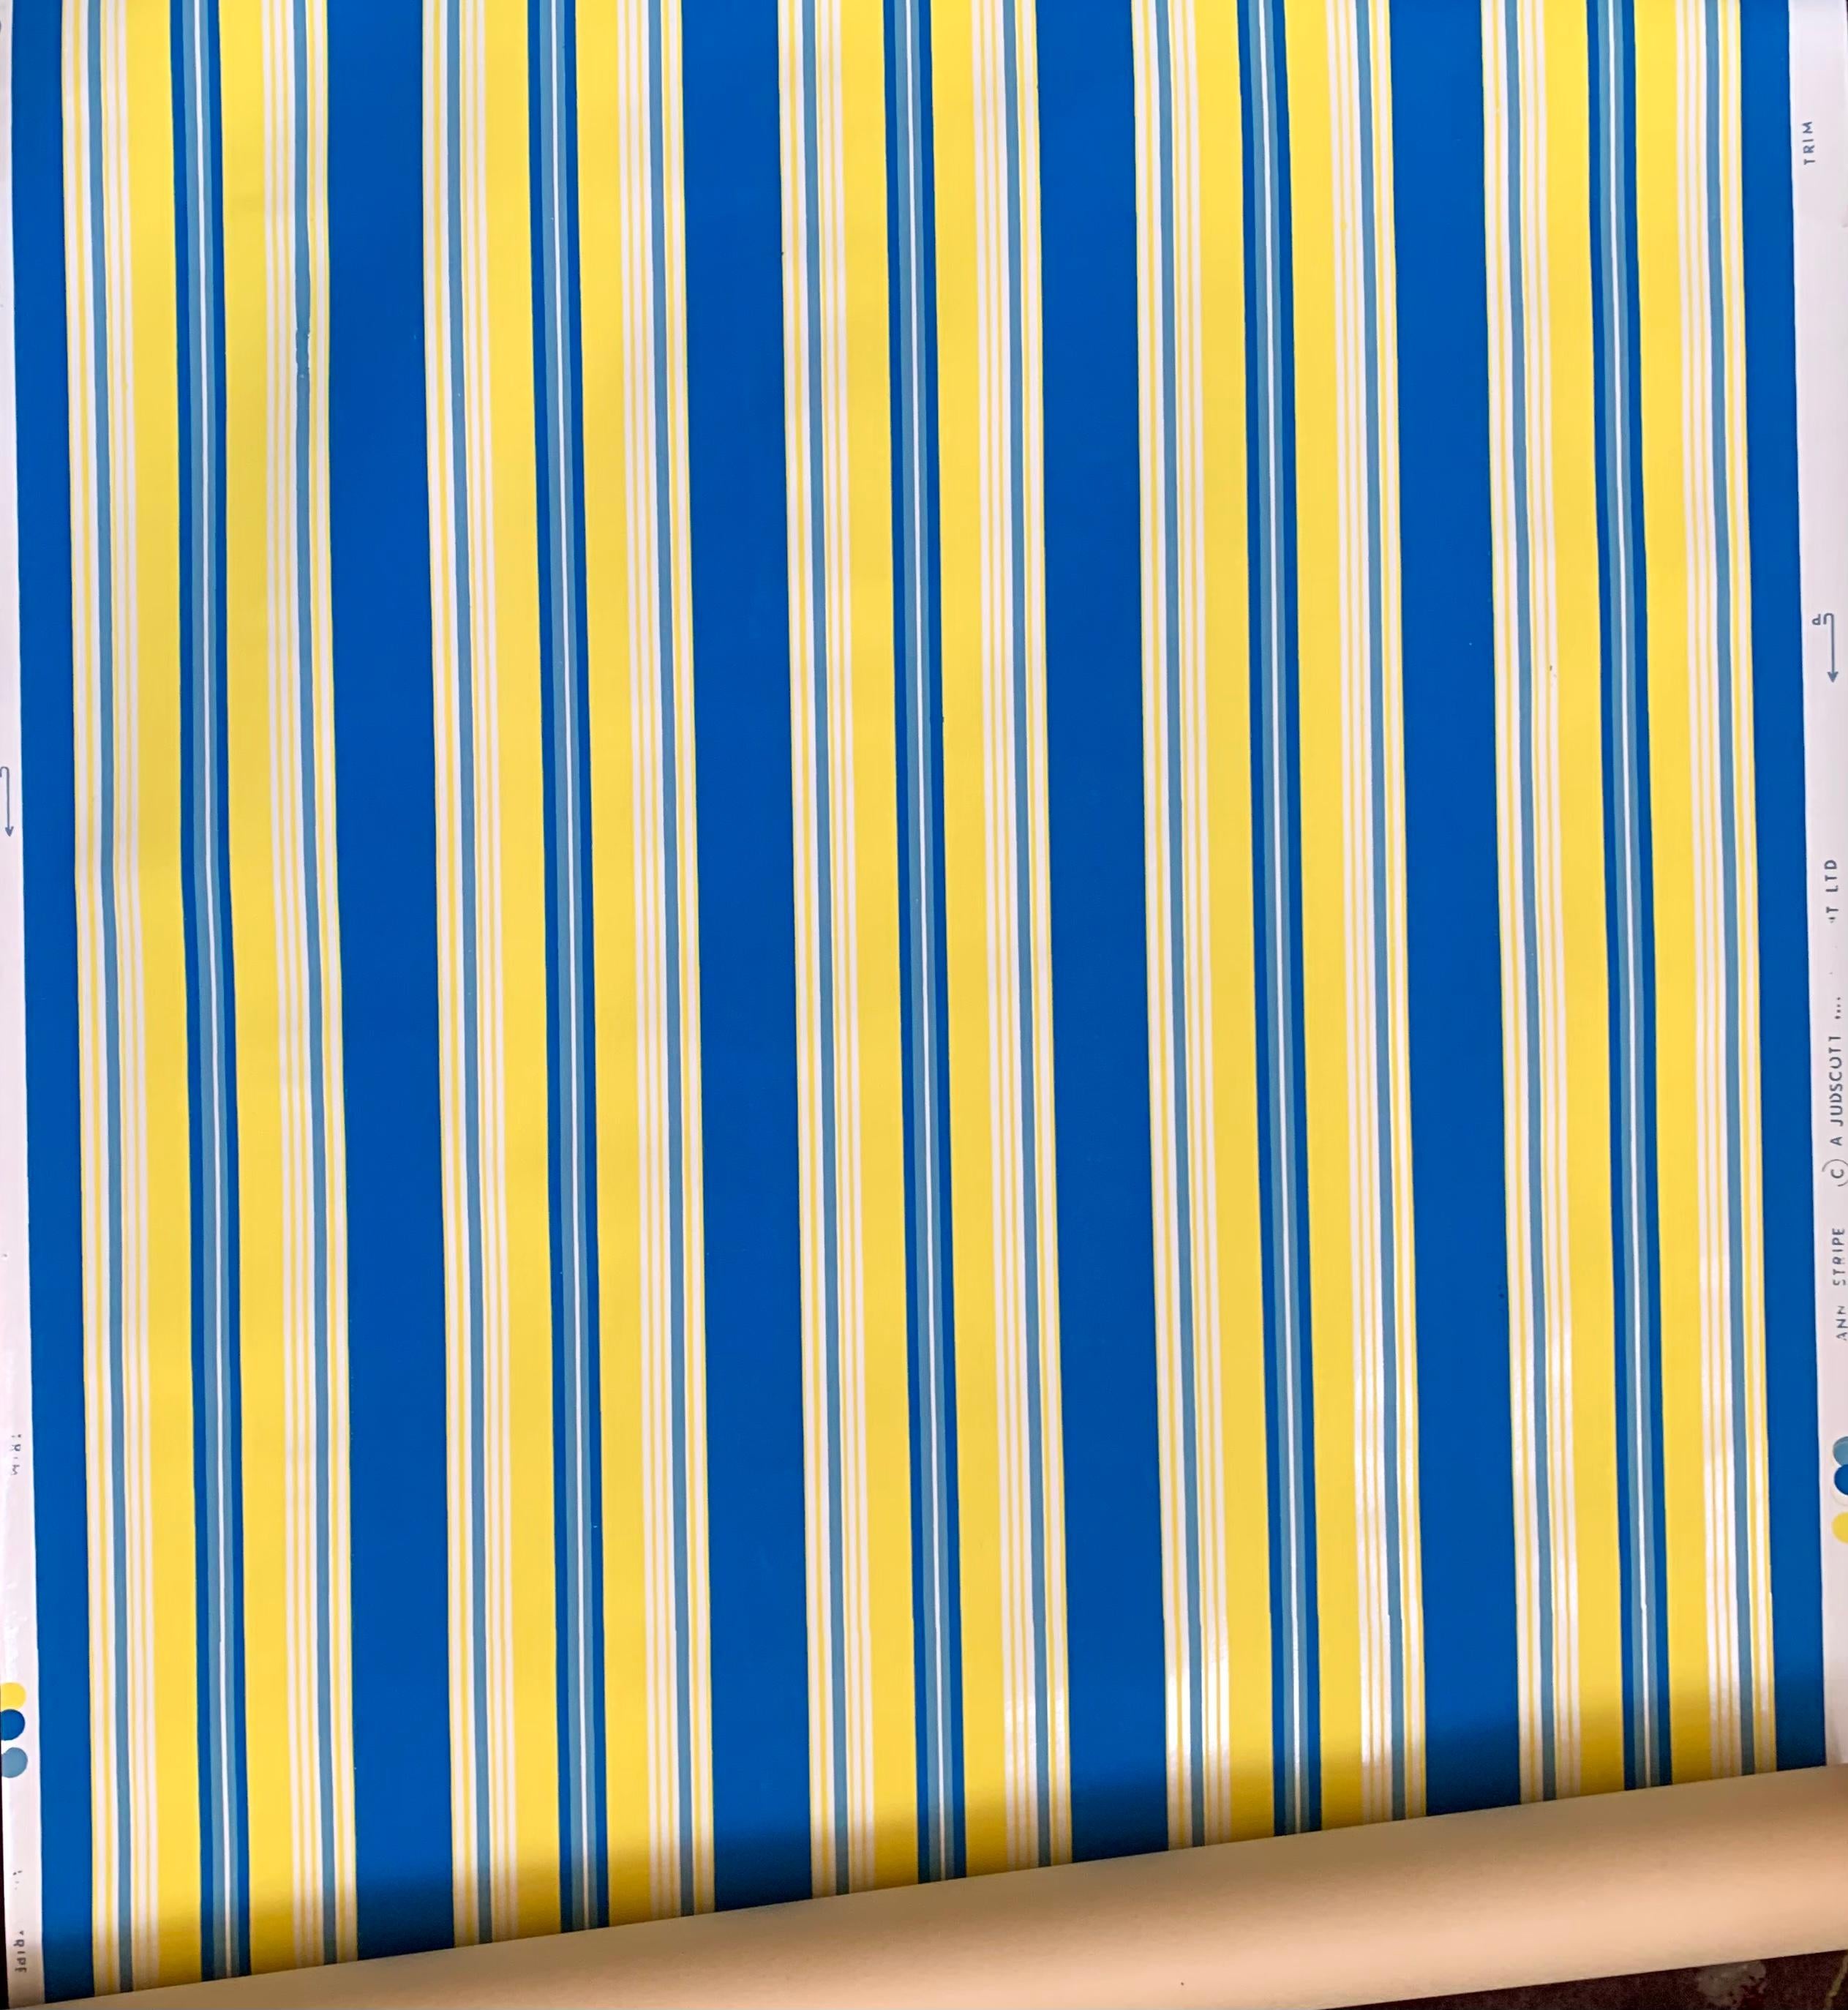 JudScott New York hand-printed ultramarine blue, yellow striped wallpaper, 1970s. Judscott was a small high-end paper and textile company based in New York in the 1970s-80s, producing hand-printed custom work. We have one complete roll and a few